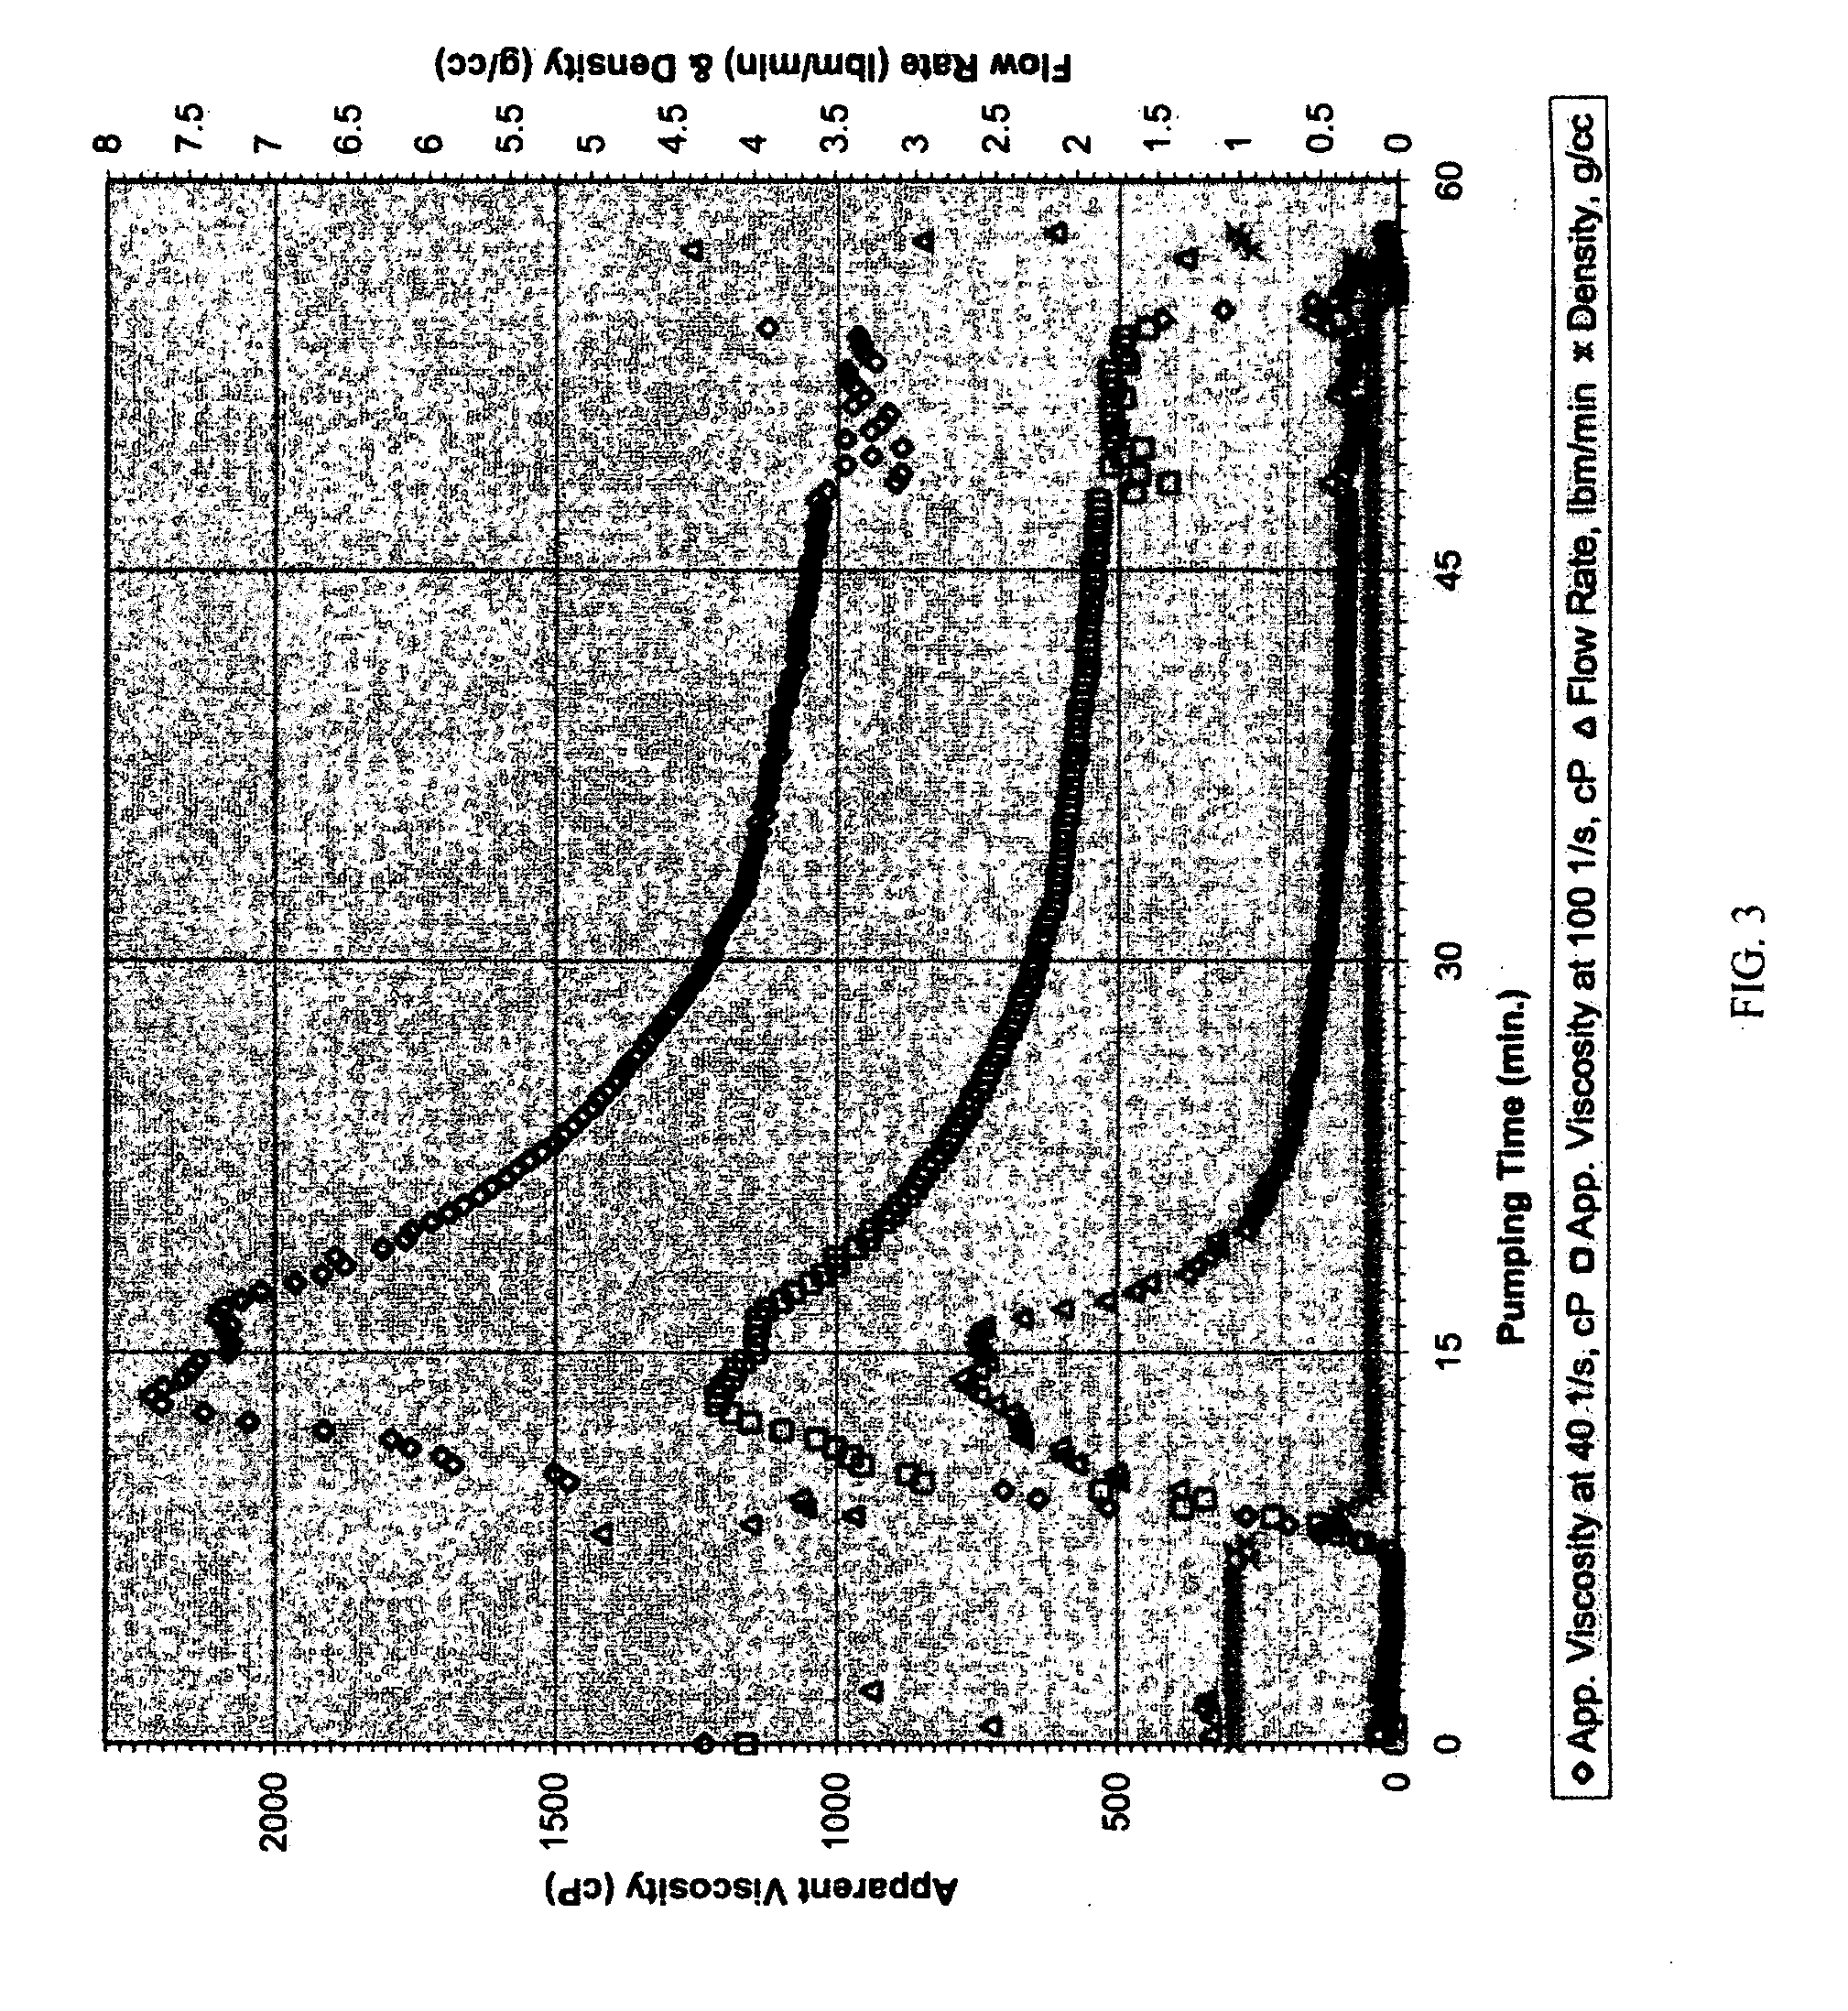 Storable fracturing suspensions containing ultra lightweight proppants in xanthan based carriers and methods of using the same